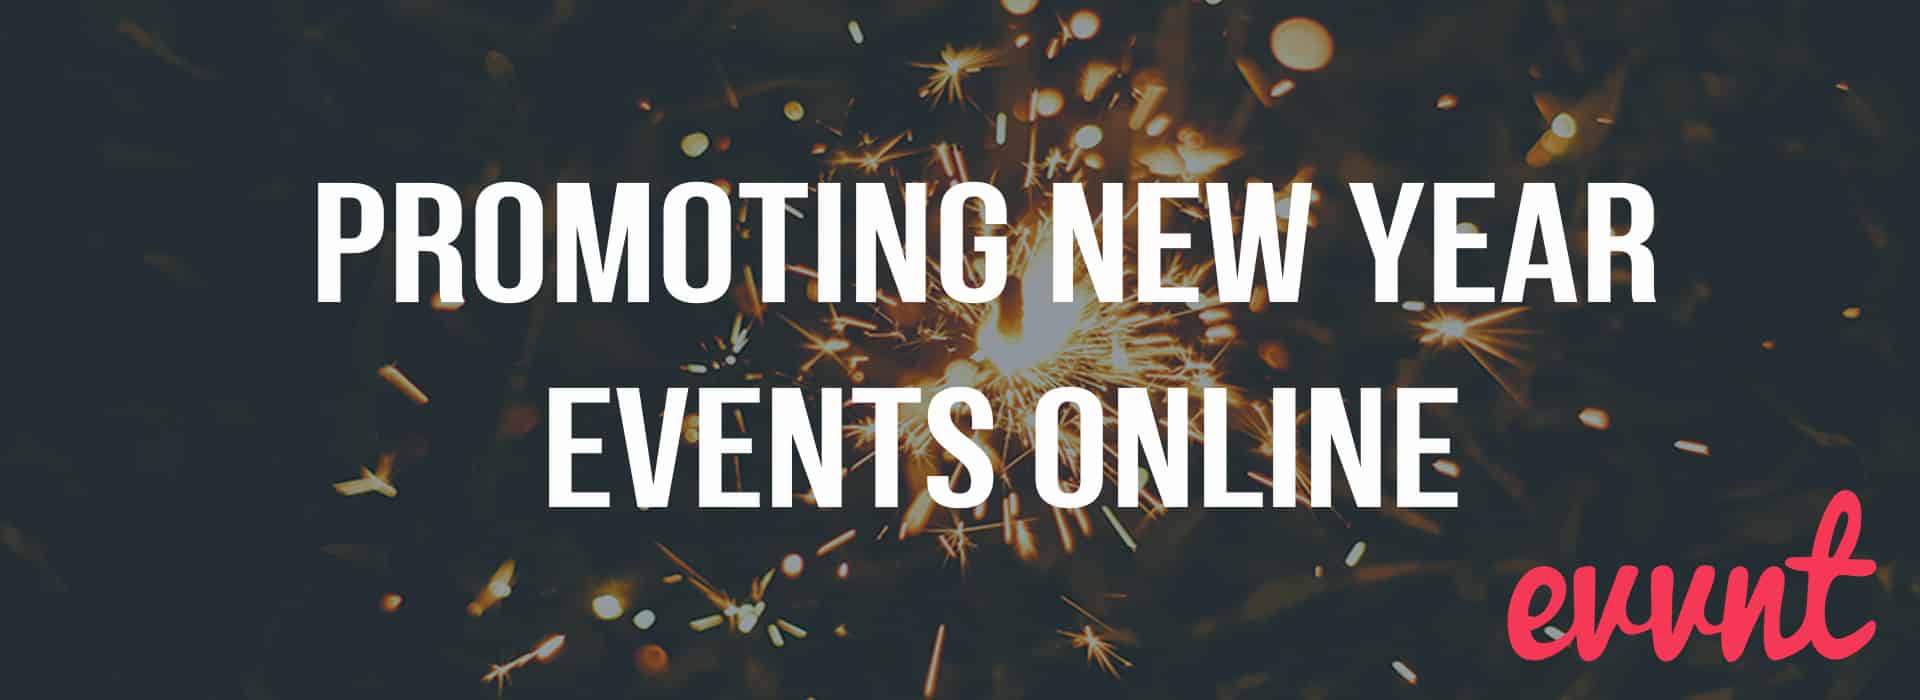 Promoting New Year Events Online